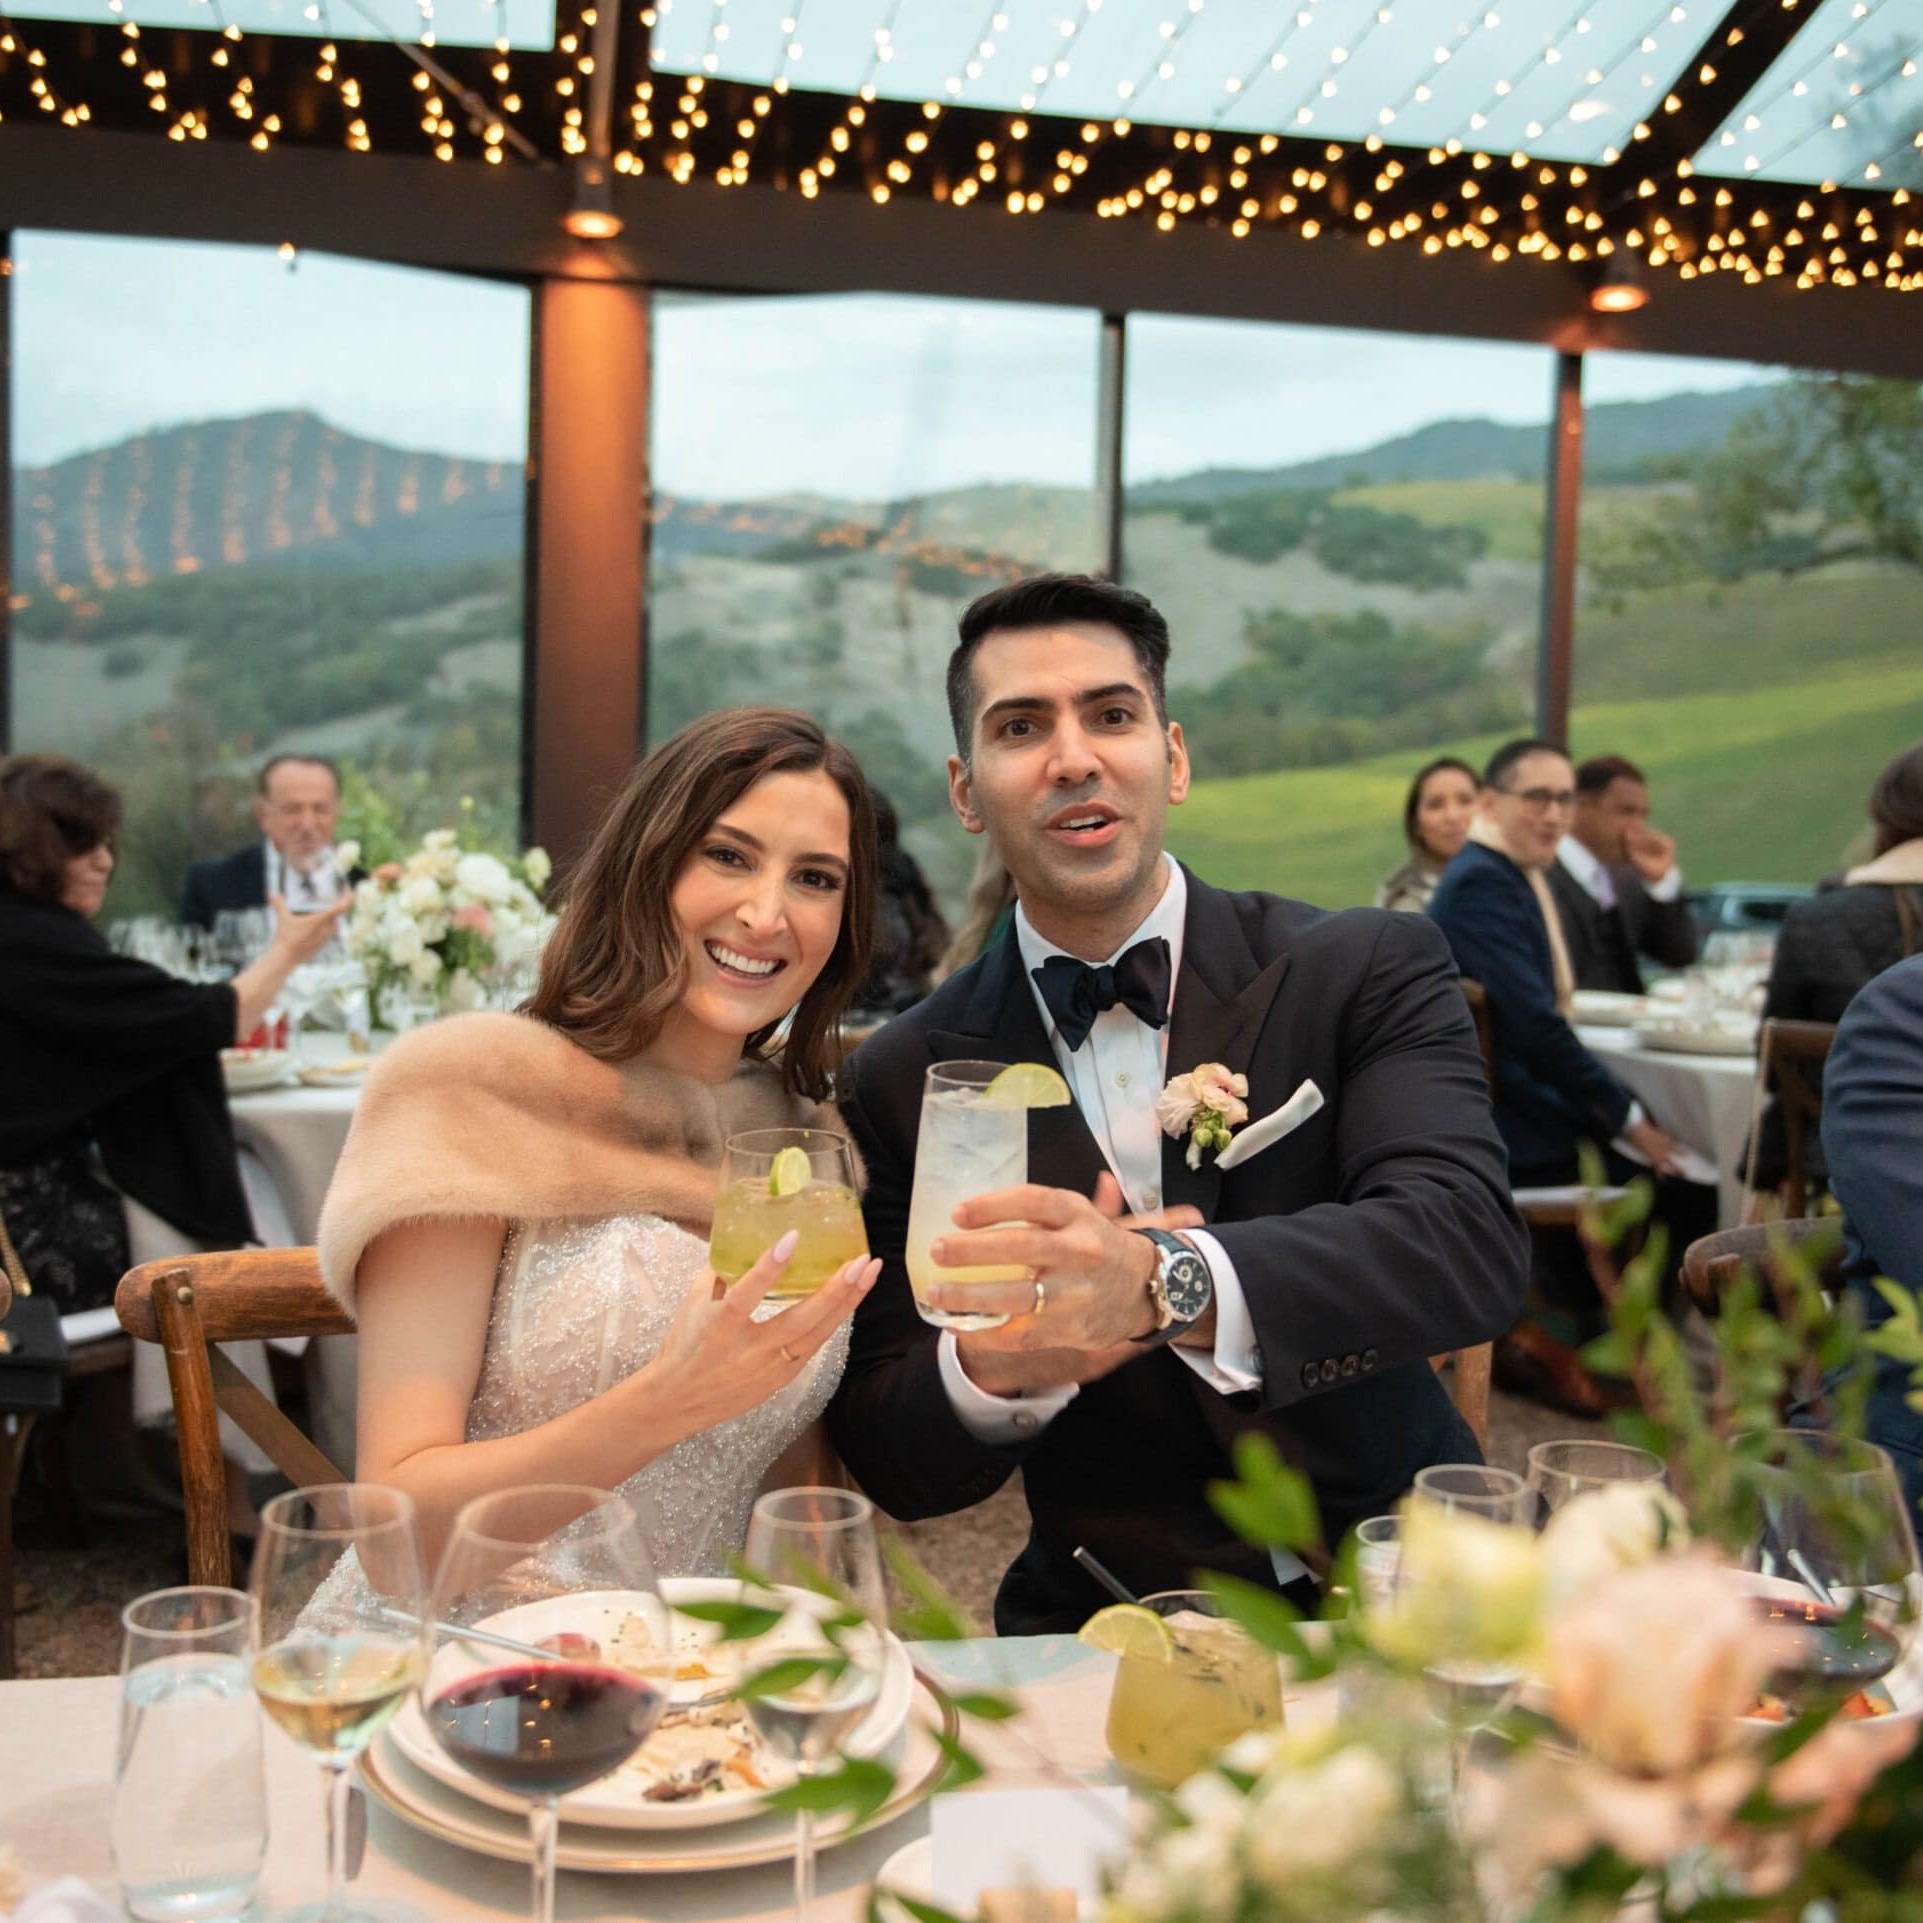 Kunde Winery wedding planned by Blissful Events